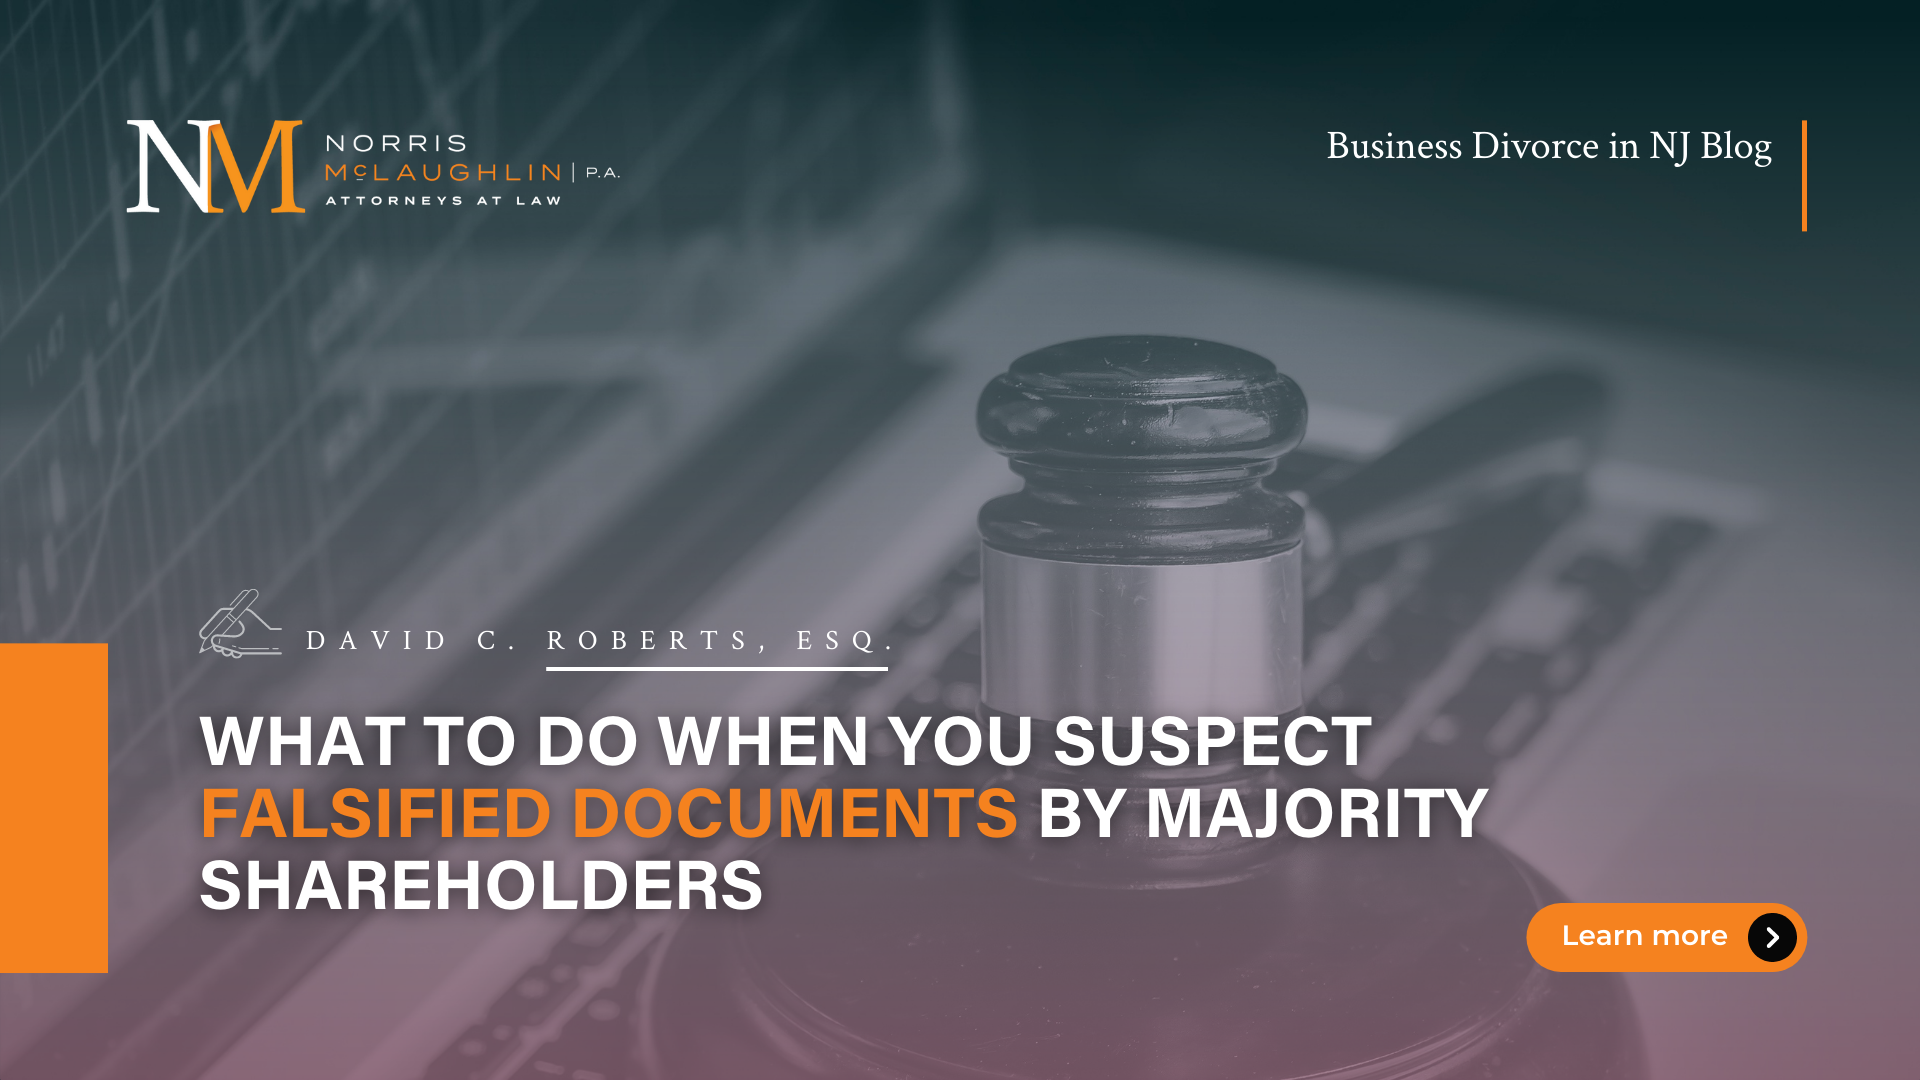 What to Do When You Suspect Falsified Documents by Majority Shareholders